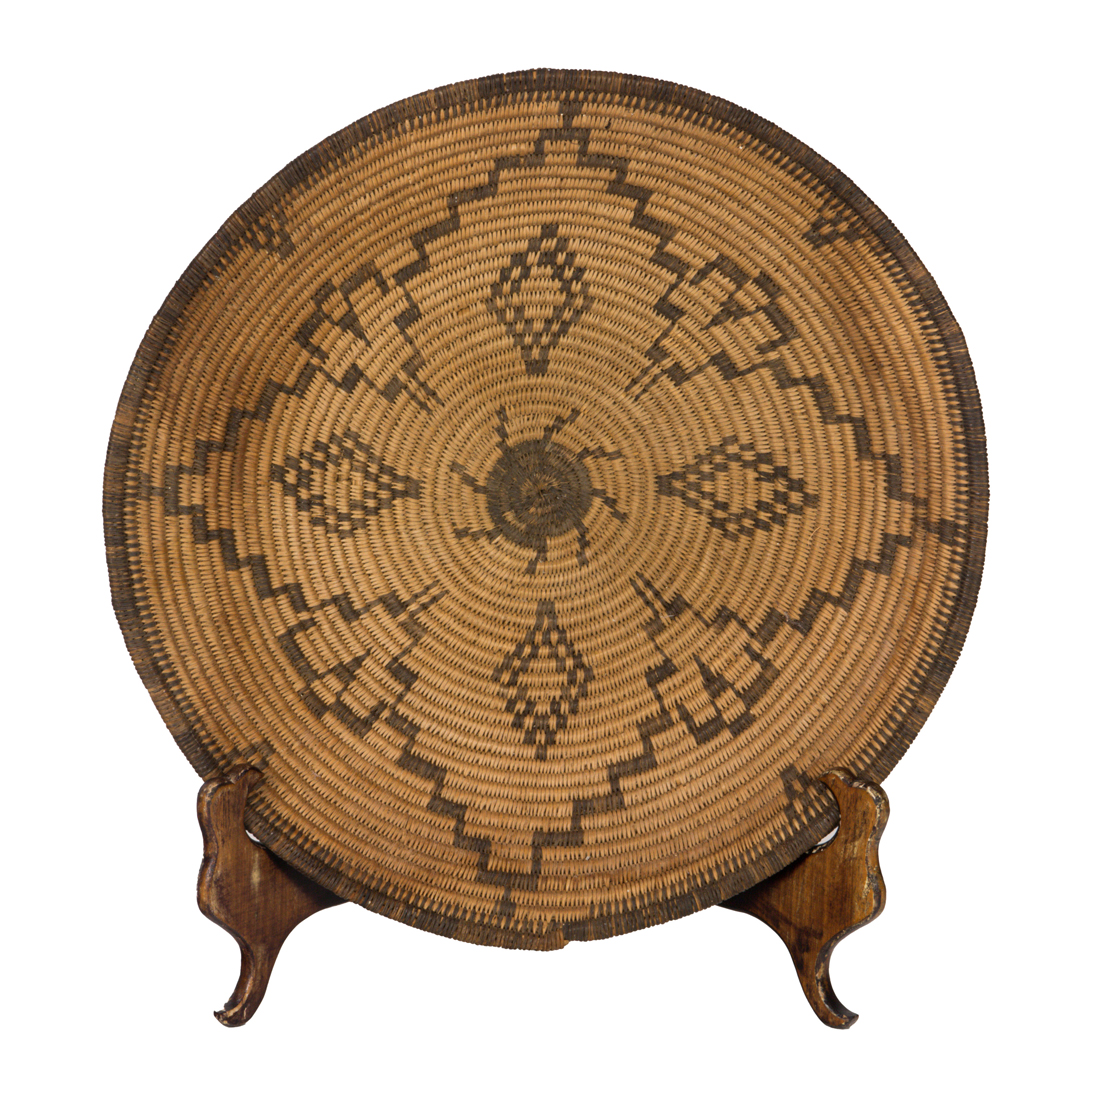 AN APACHE PICTORIAL BASKETRY BOWL